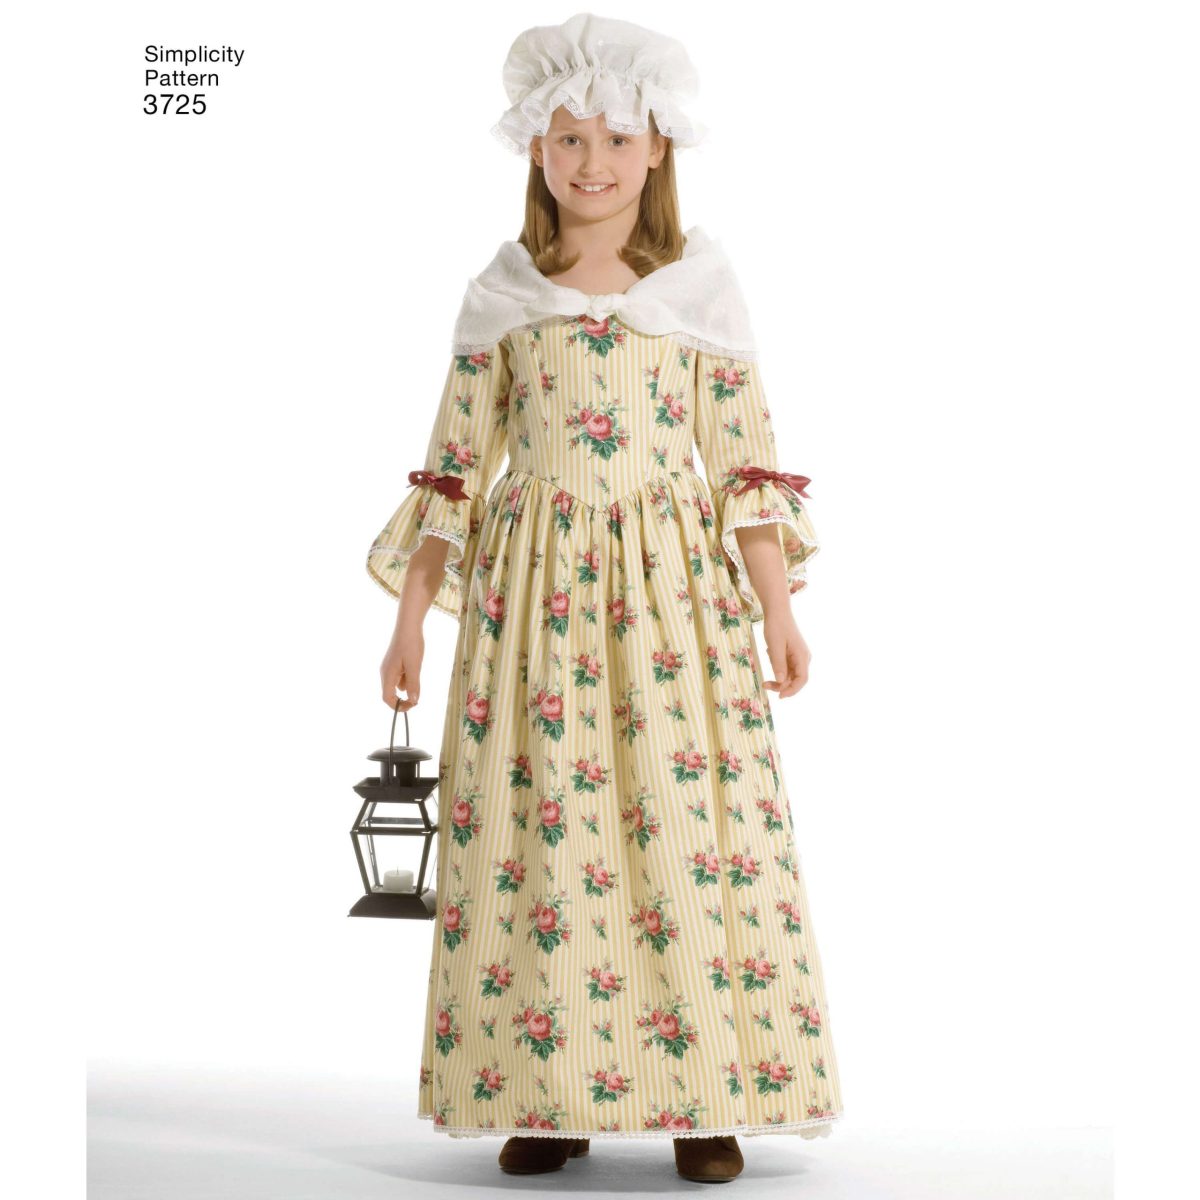 Simplicity Sewing Pattern 3725 Child's & Girl's Costumes